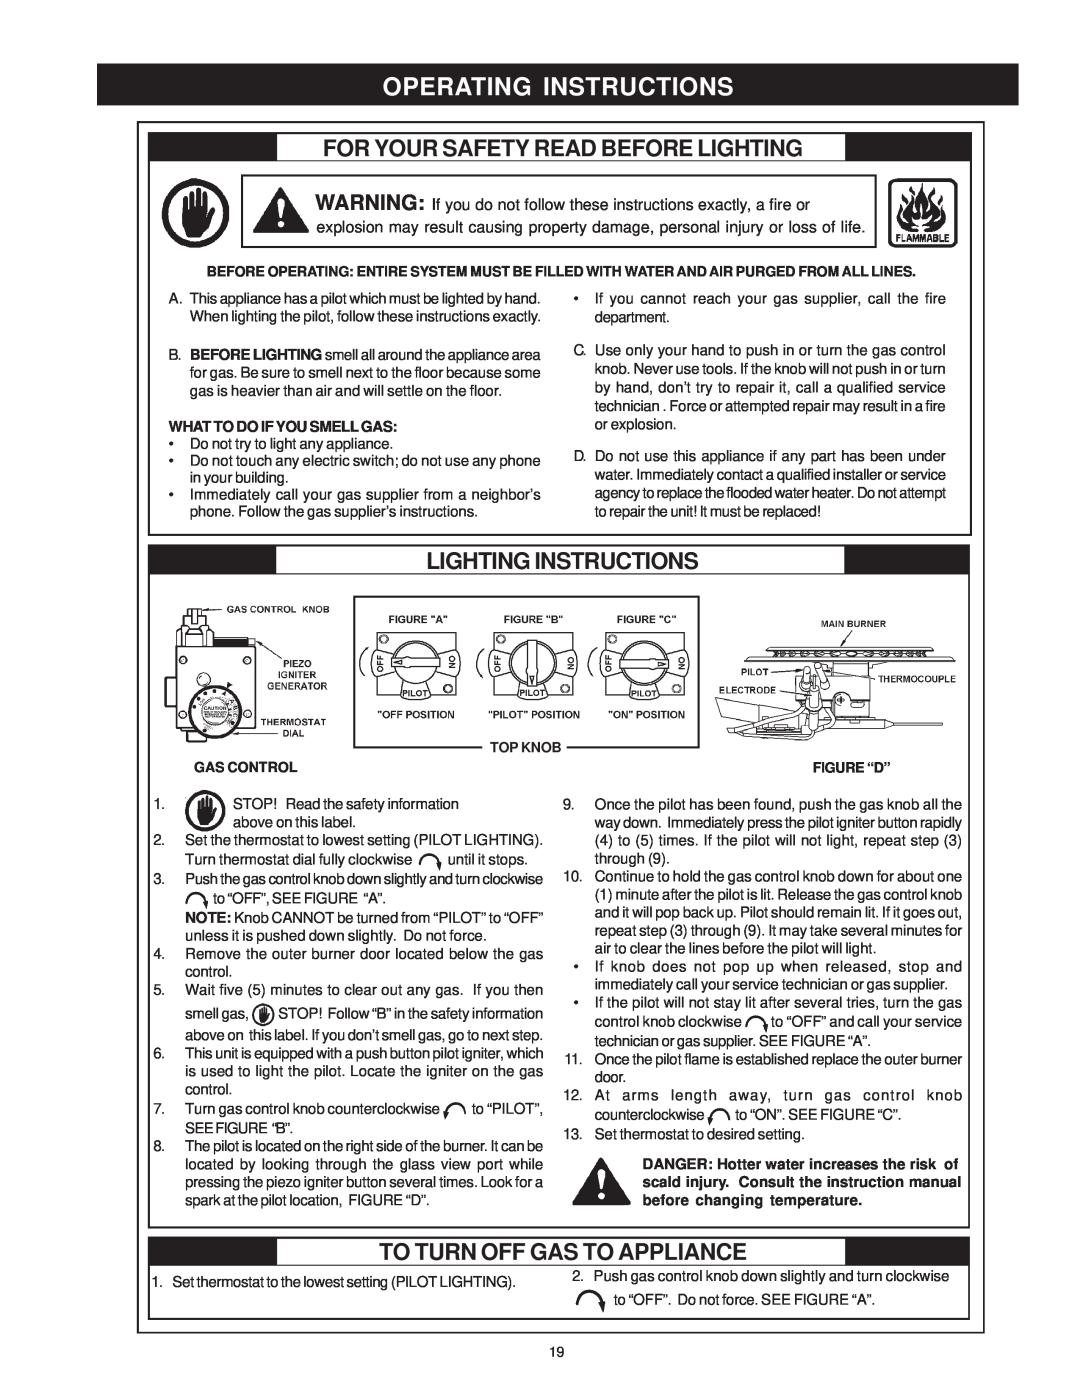 Maytag HRX40HARS Operating Instructions, For Your Safety Read Before Lighting, Lighting Instructions, Top Knob, Figure “D” 